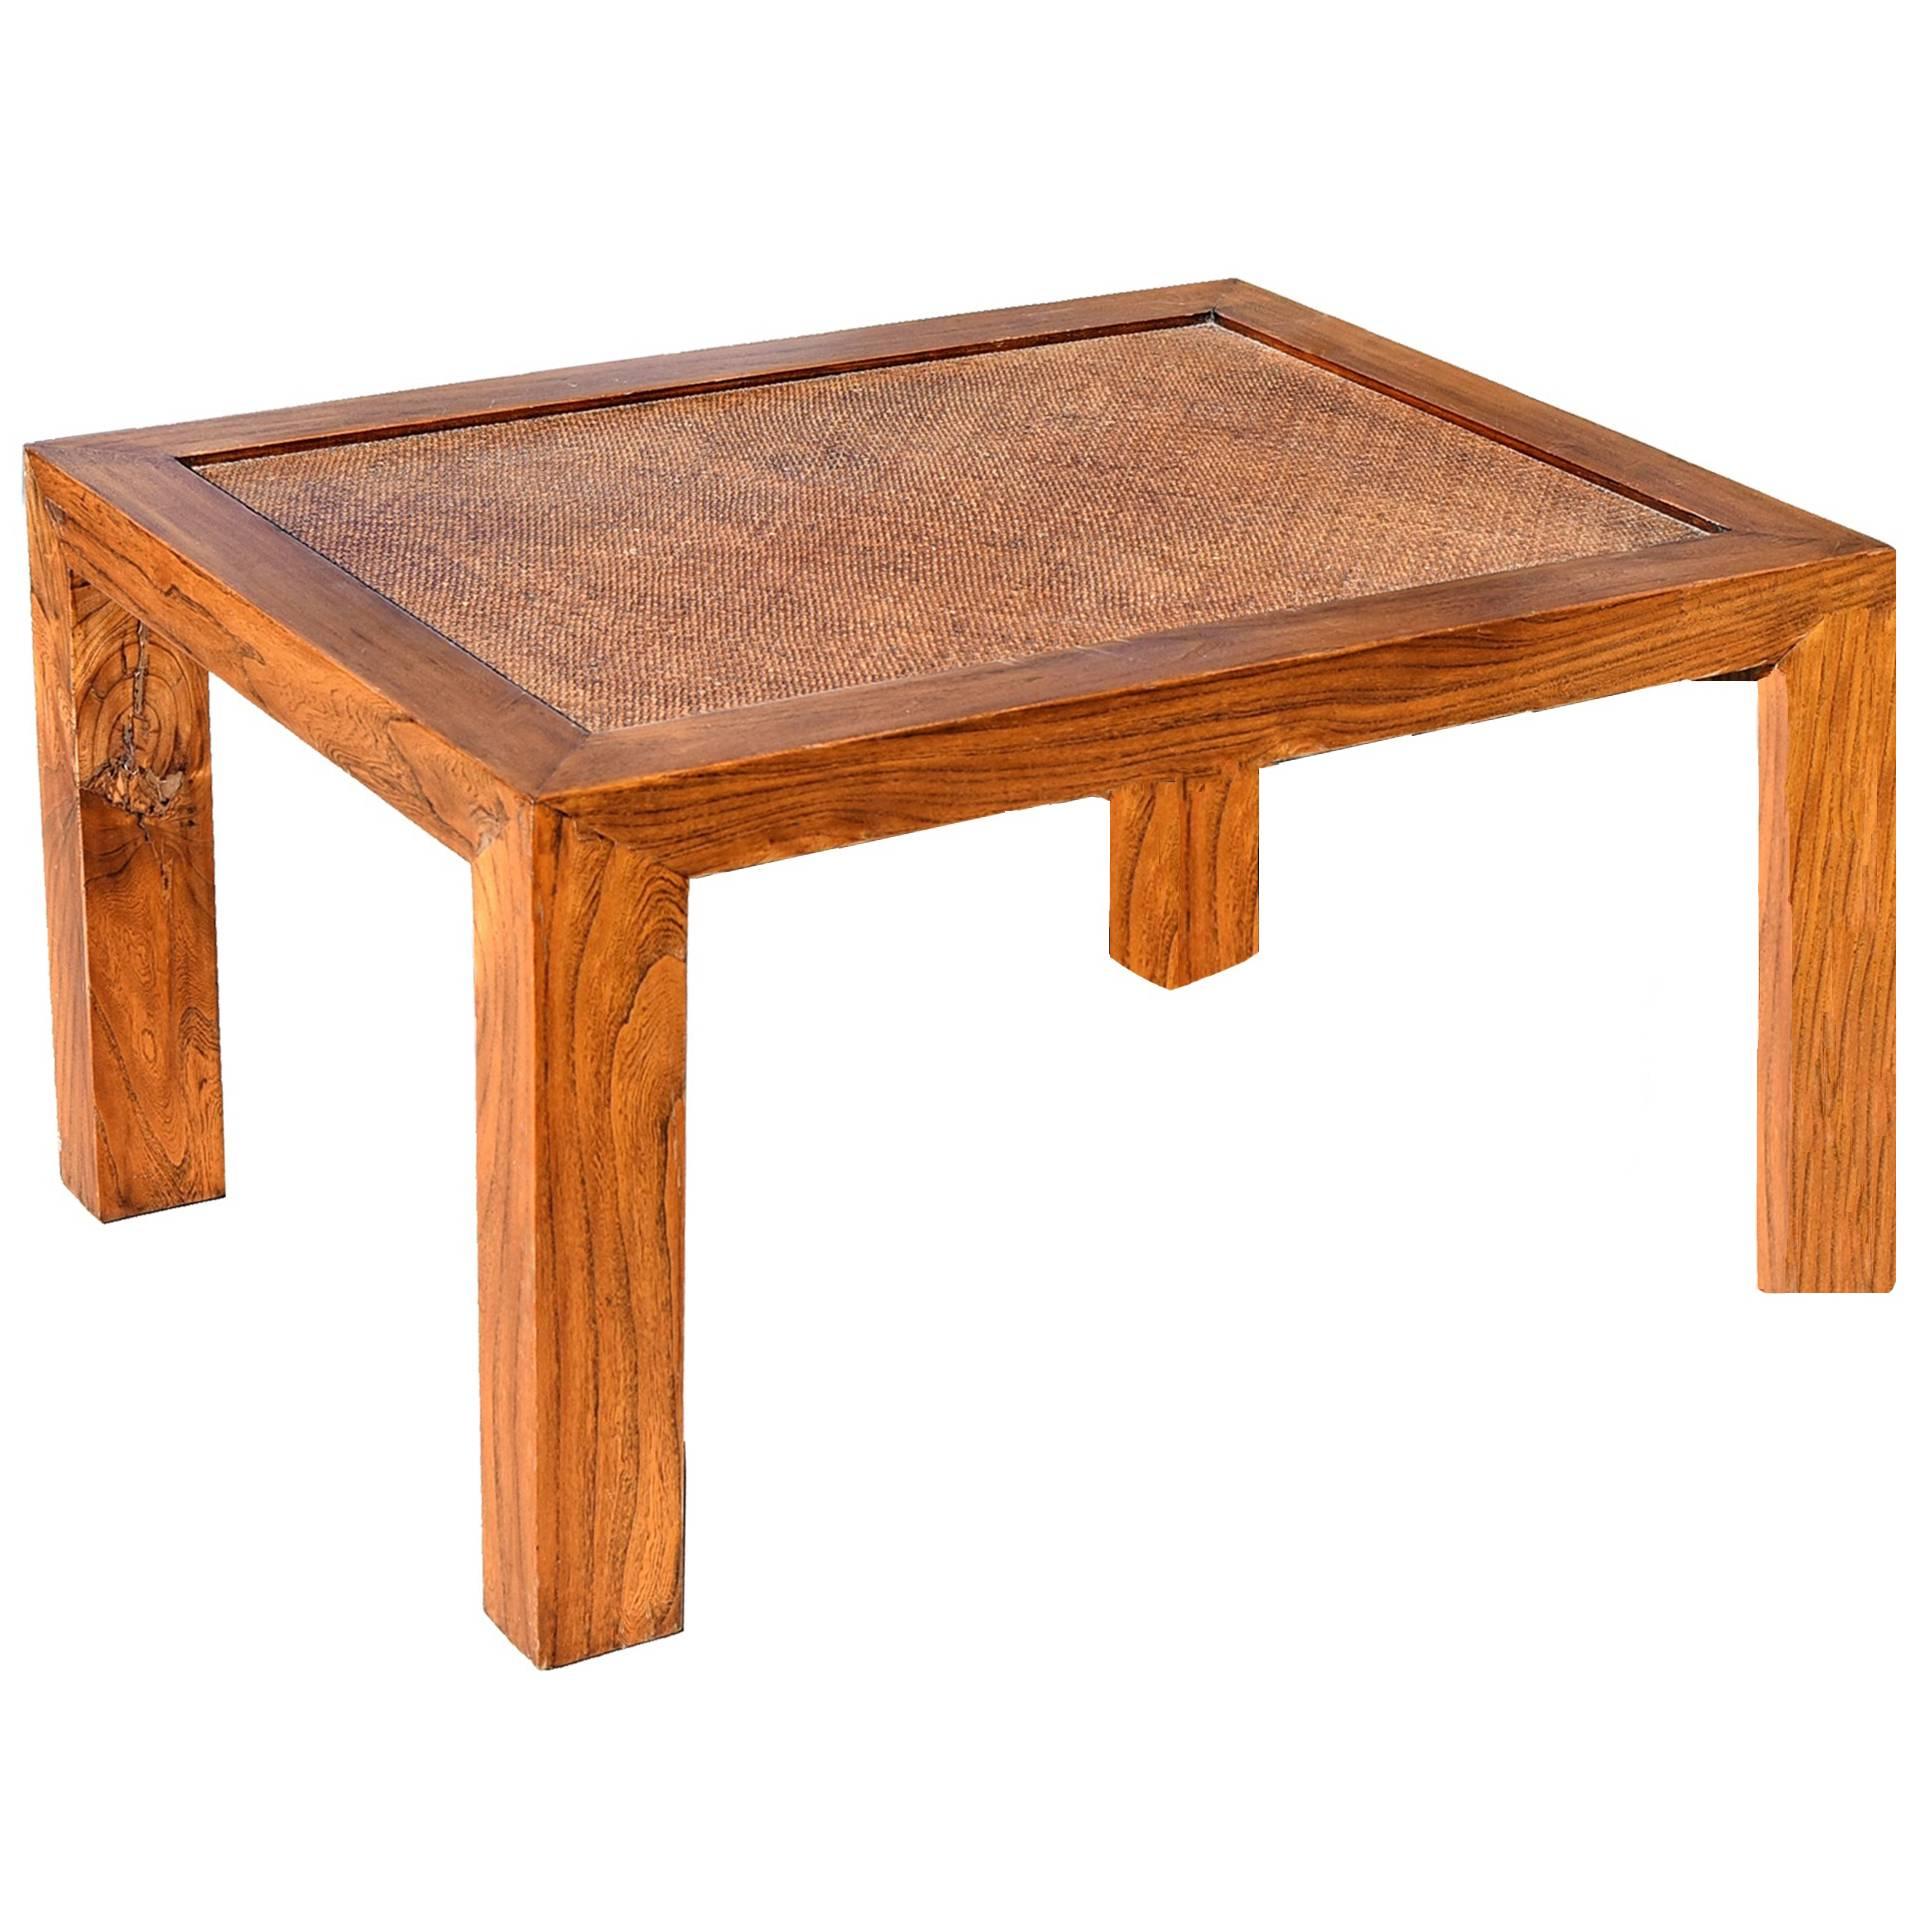 Natural Finish Parsons Table with Rattan Top